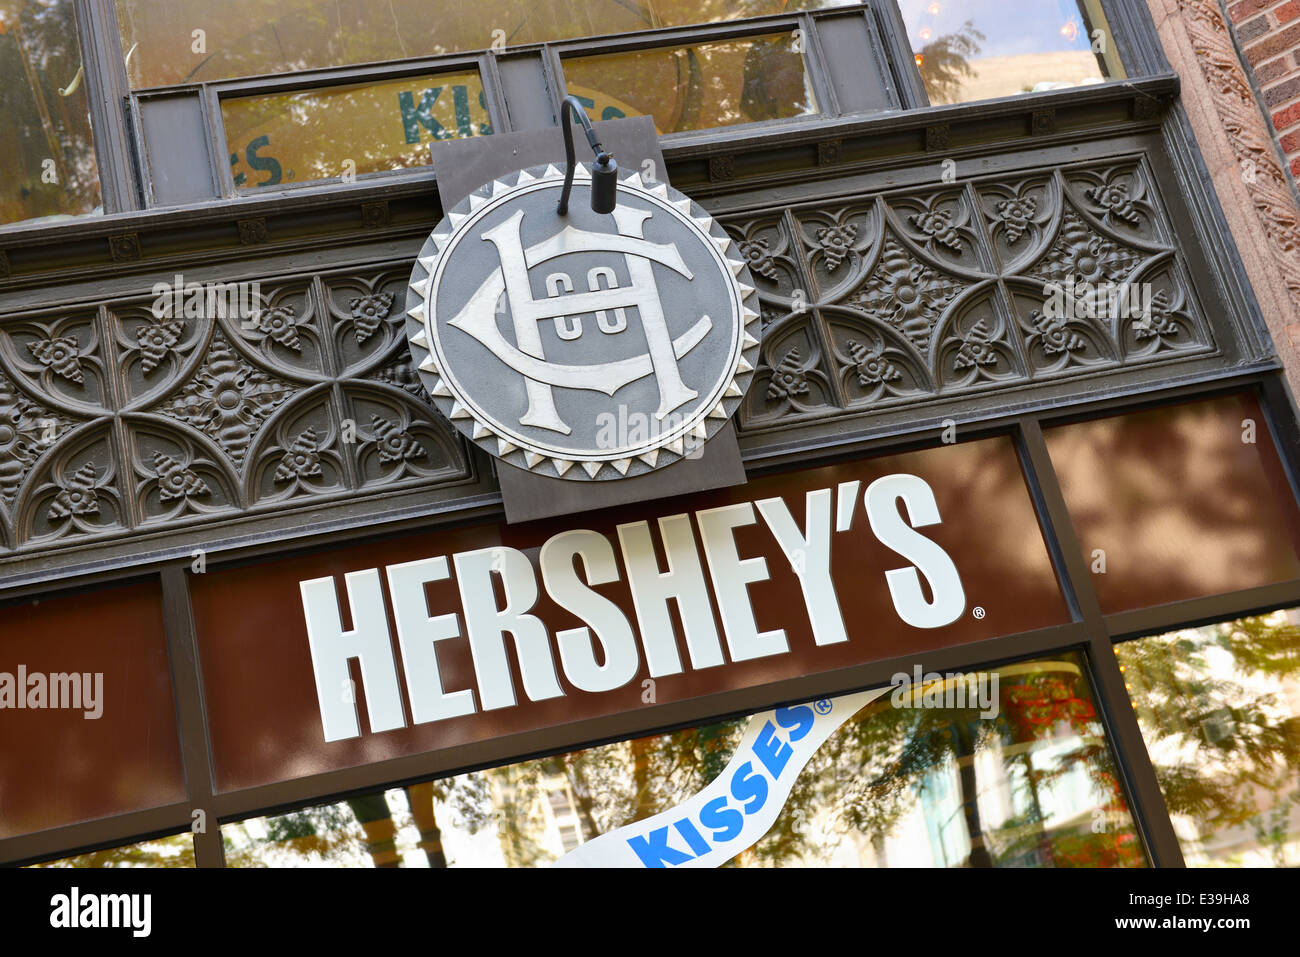 Hershey's Kisses, sign above shop, store in Chicago Stock Photo